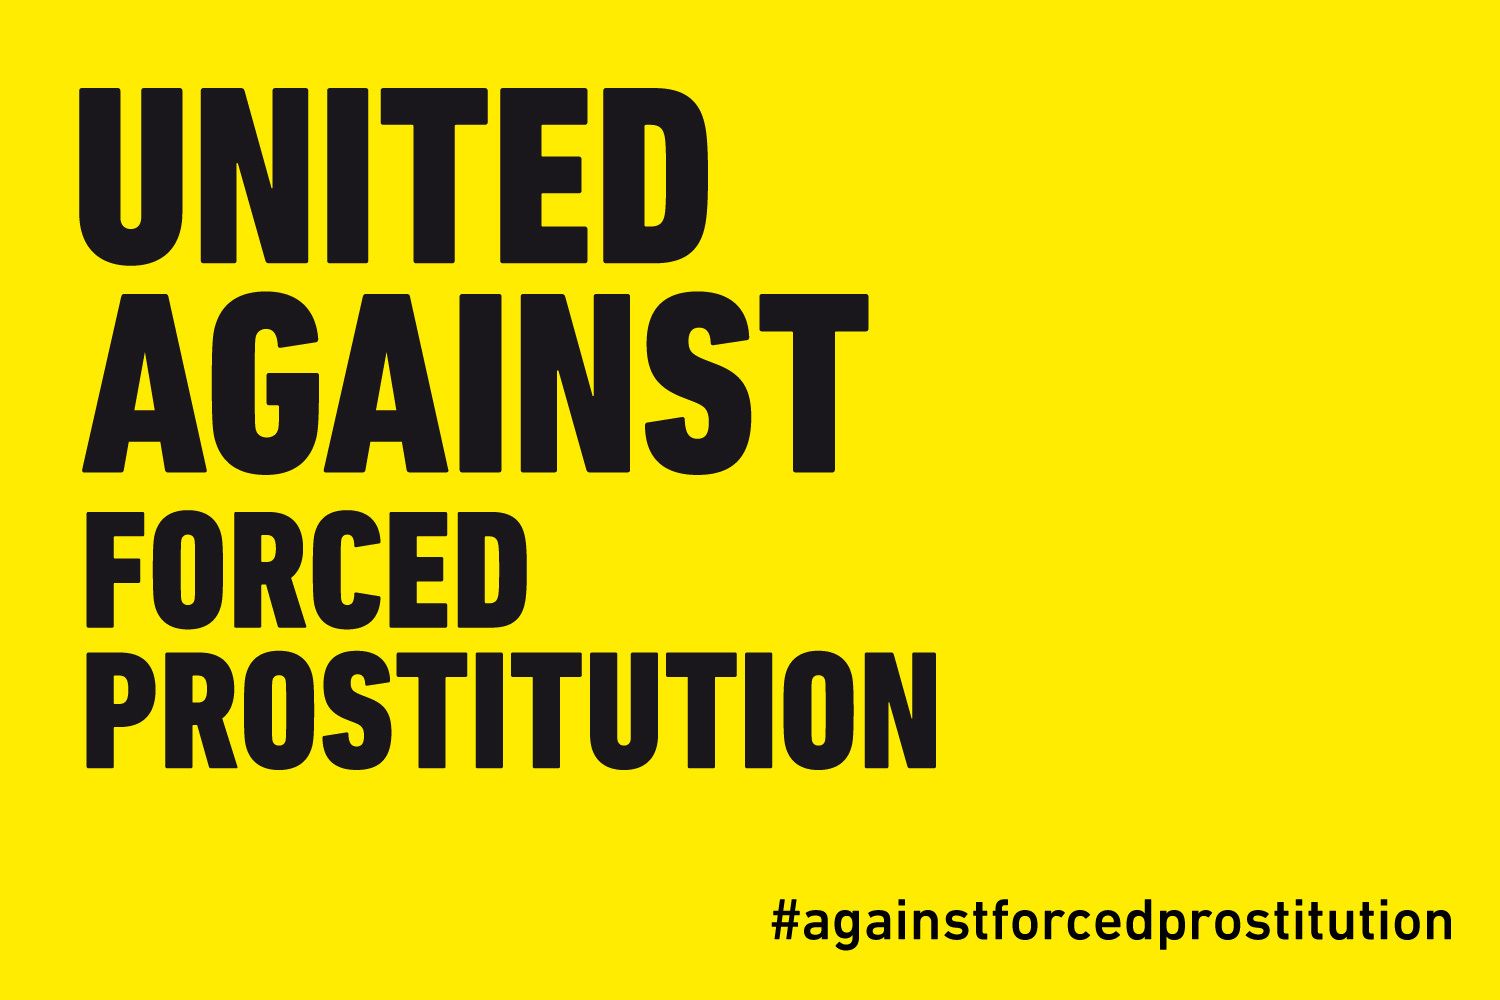 UNITED AGAINST FORCED PROSTITUTION